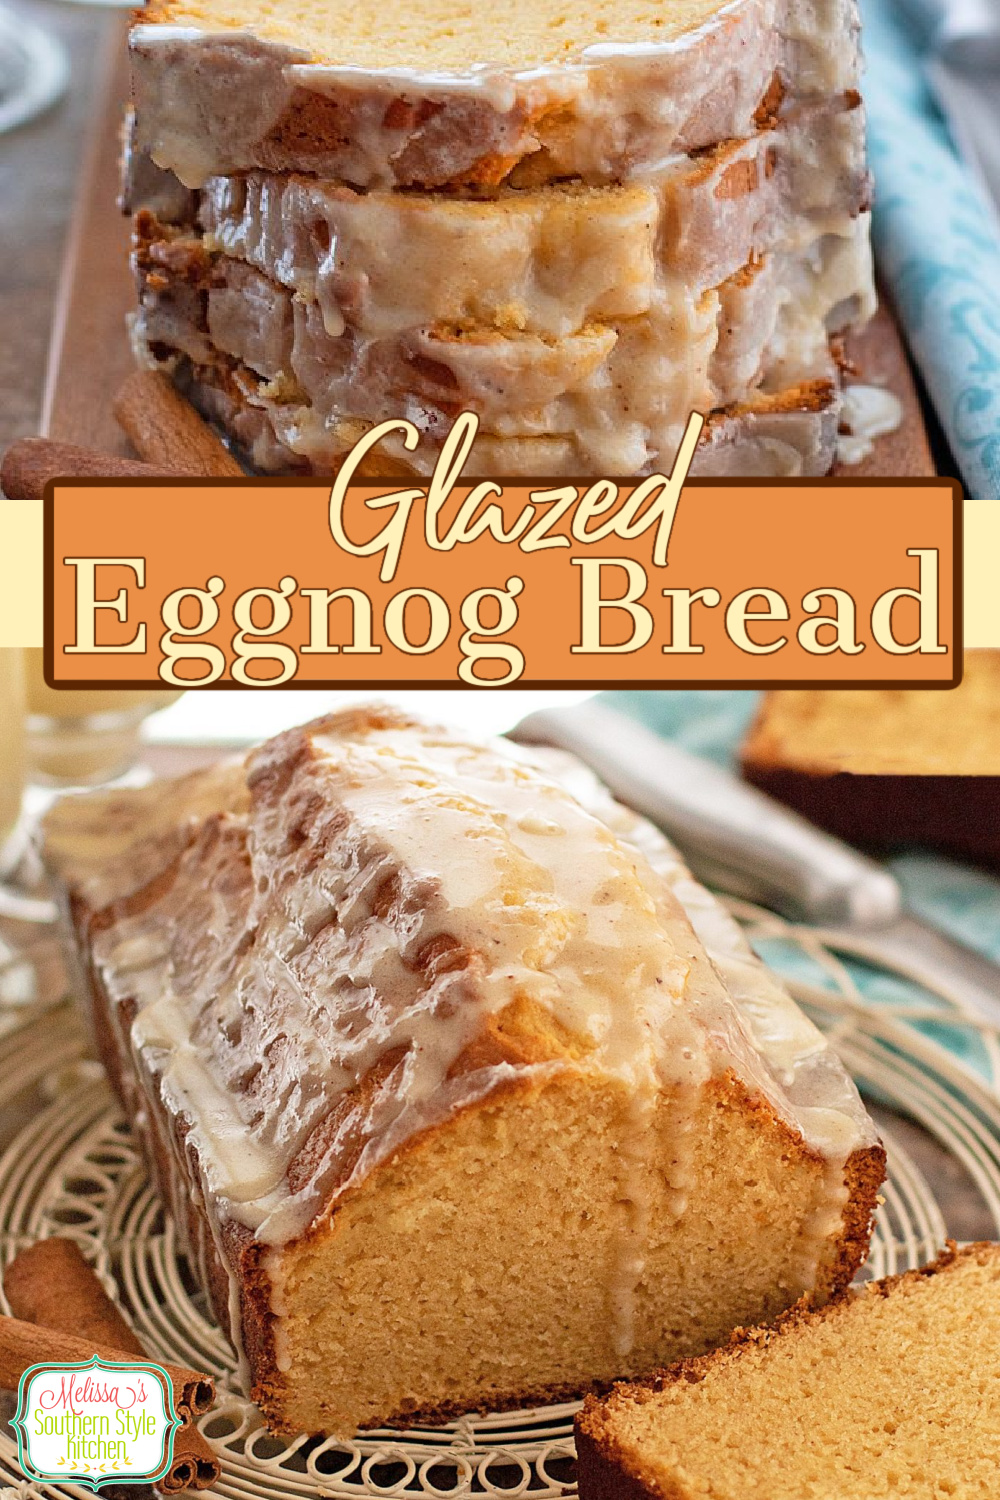 This decadent Glazed Eggnog Bread recipe results in a sweet cake-like treat that's perfect for breakfast, brunch dessert or as a mid morning treat #eggnog #eggnogbread #eggnogdesserts #quickbread #eggnogquickbread #eggnogbreadrecipe via @melissasssk